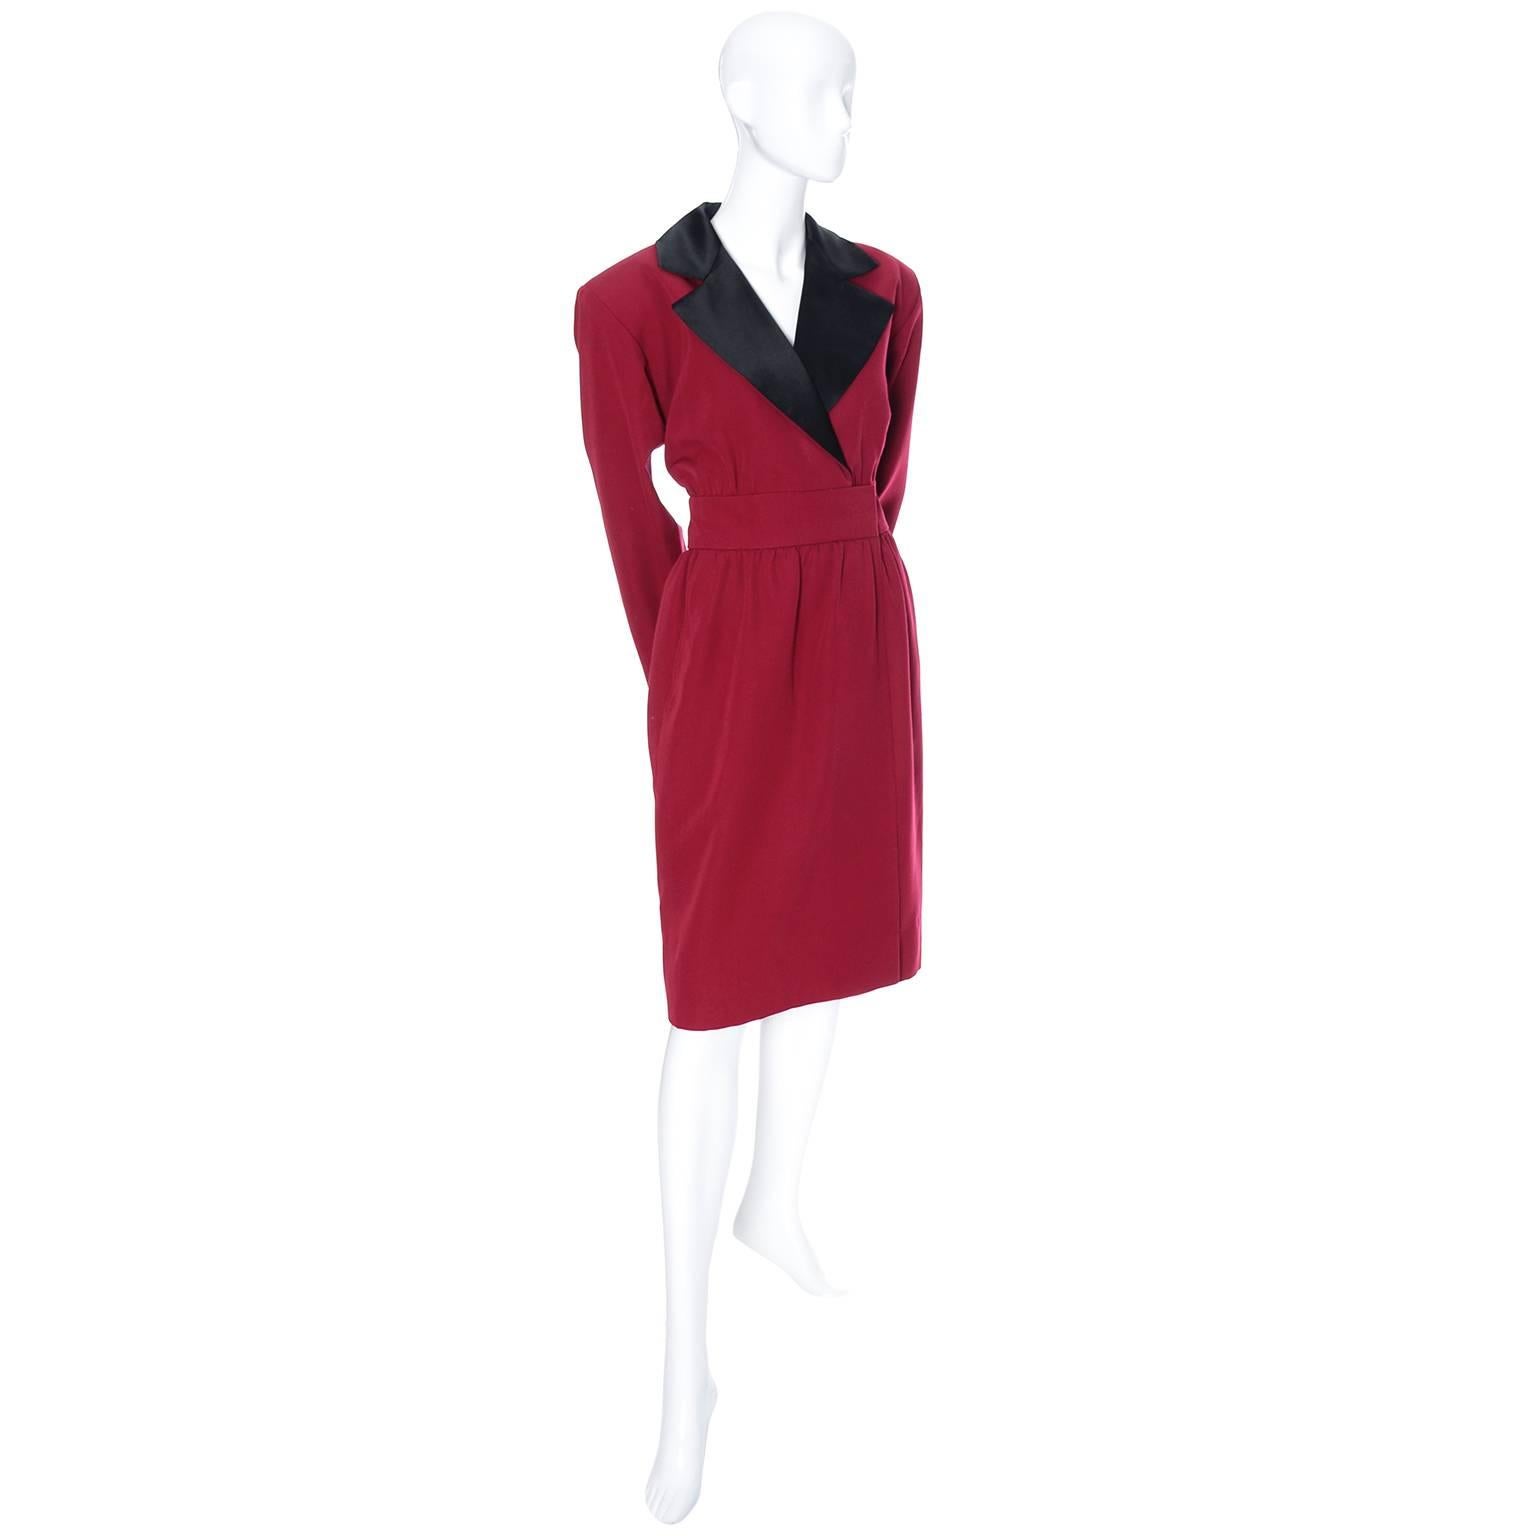 This beautiful vintage YSL dress in in a beautiful shade of red wool with a pretty black satin lapel.  This dress is in excellent condition - the only thing found is that the previous owner added a small amount of velcro underneath to keep it closed